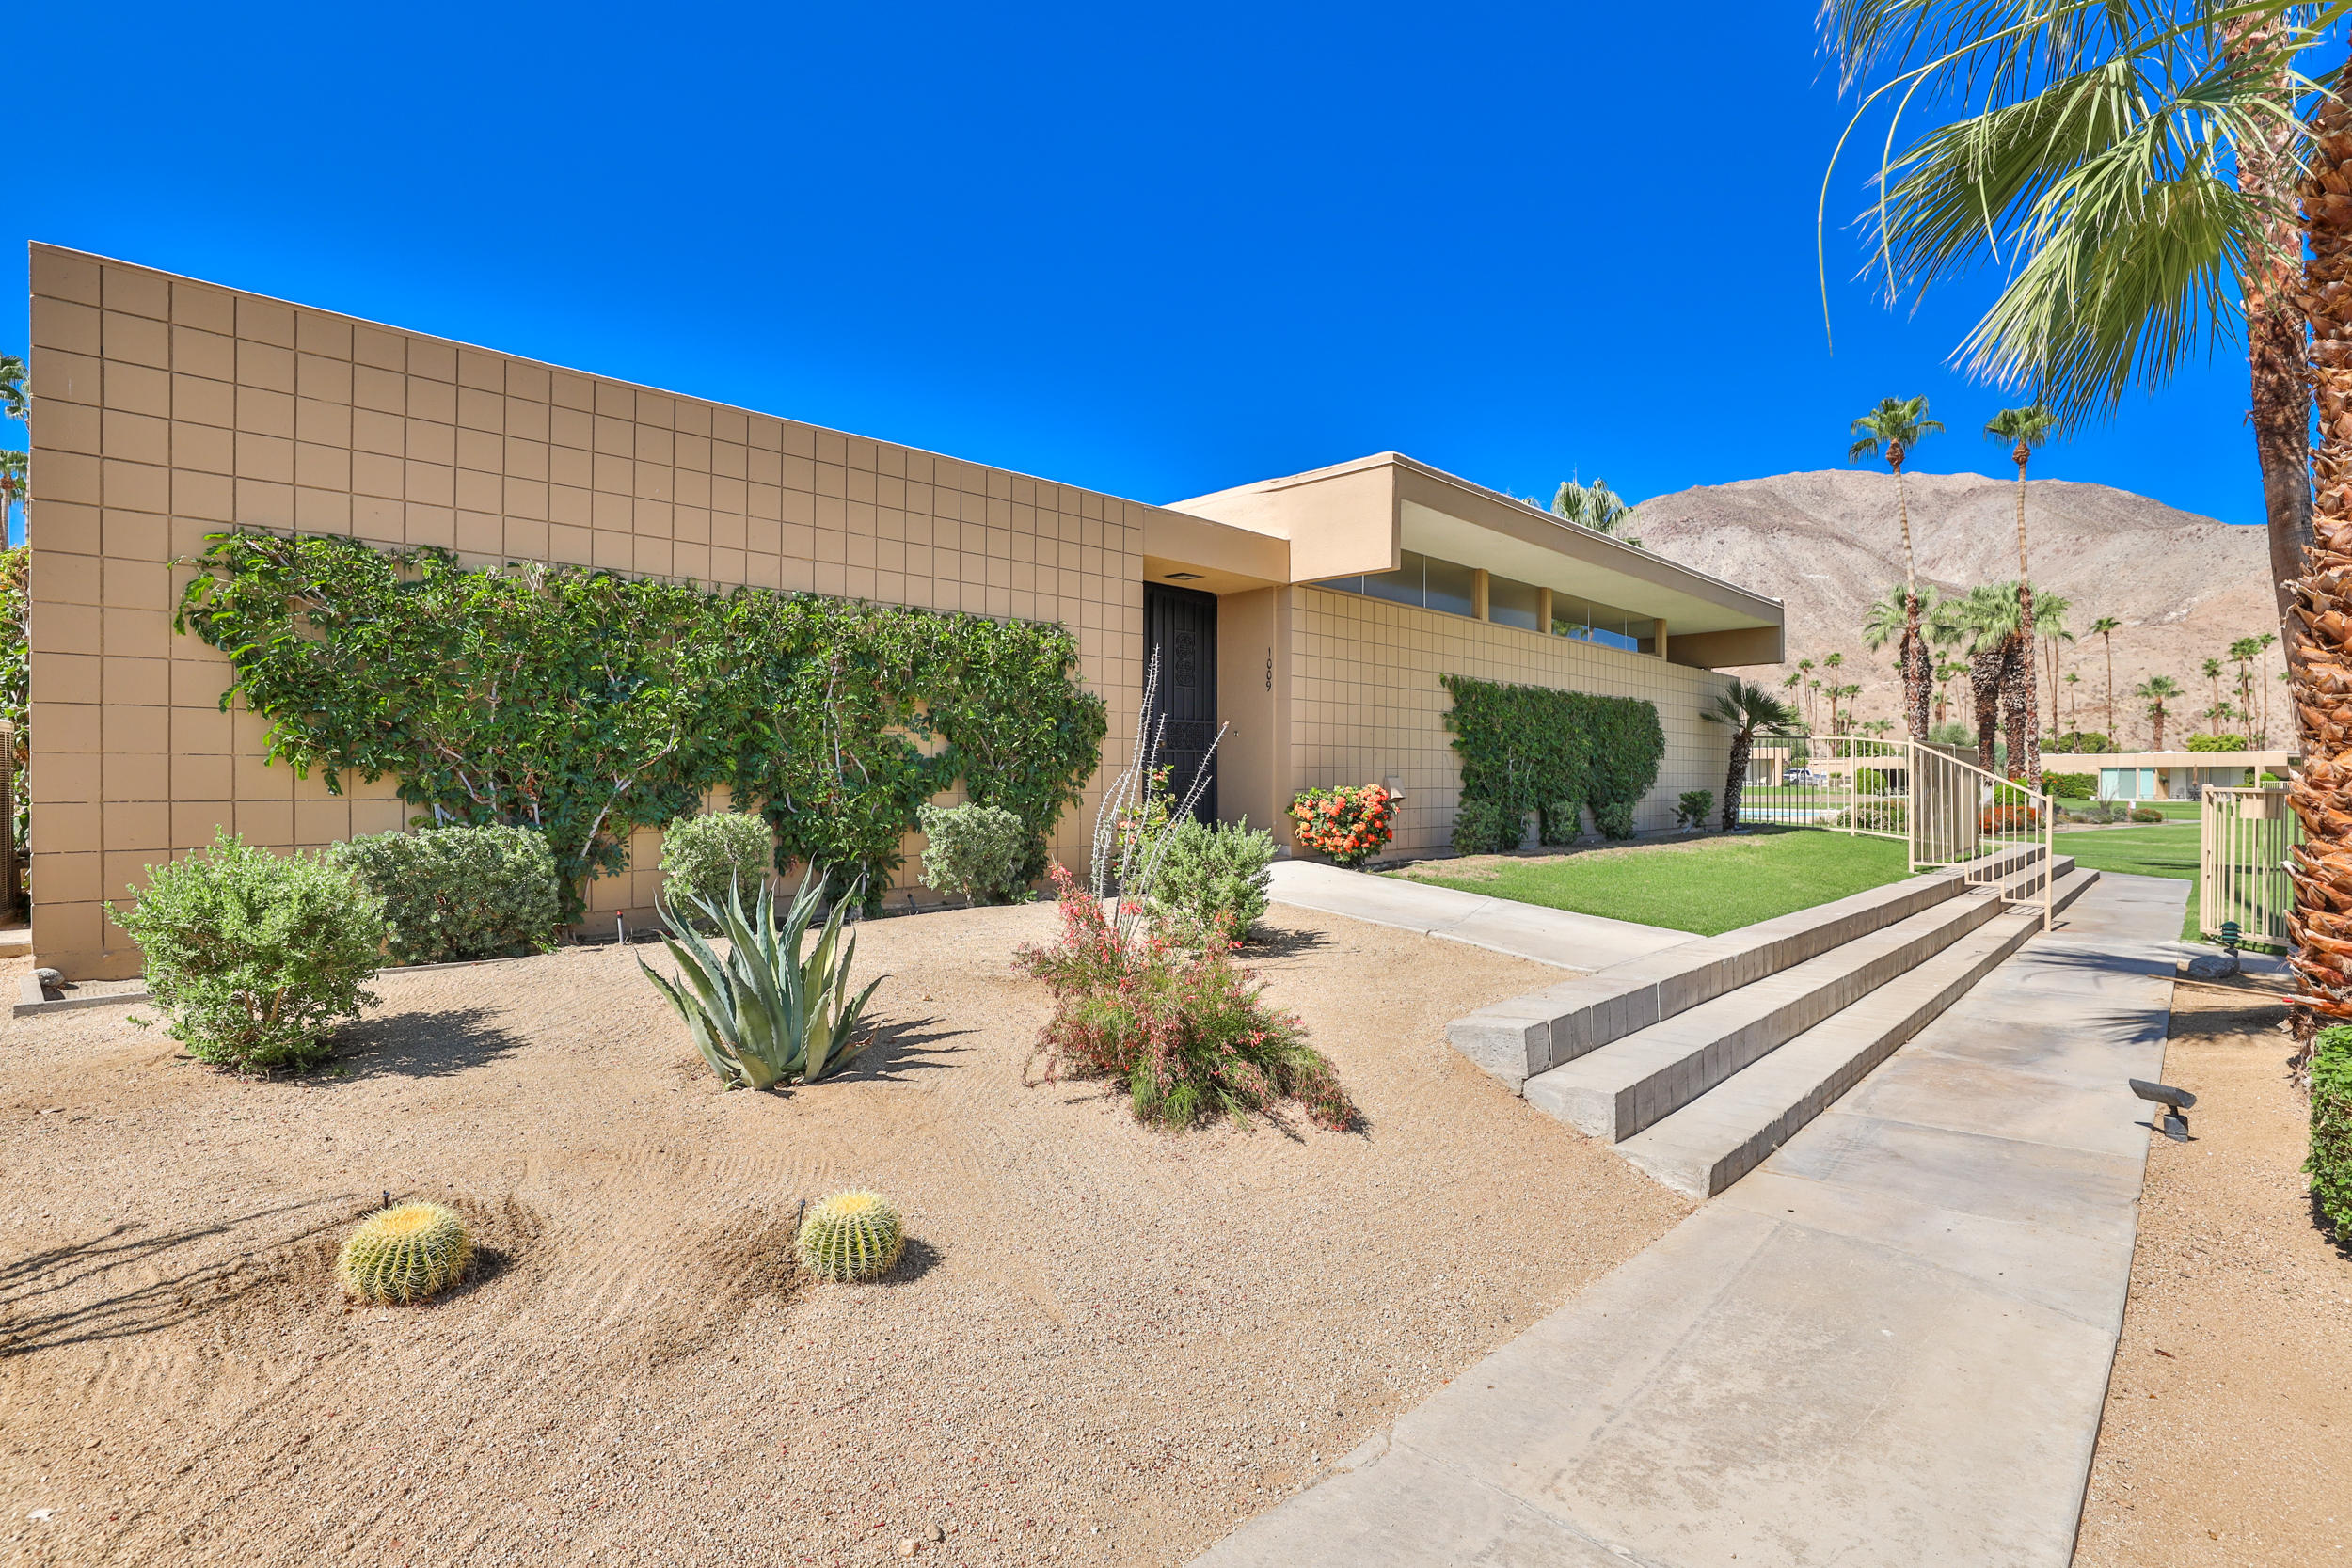 Image 1 for 72551 El Paseo ST #1009